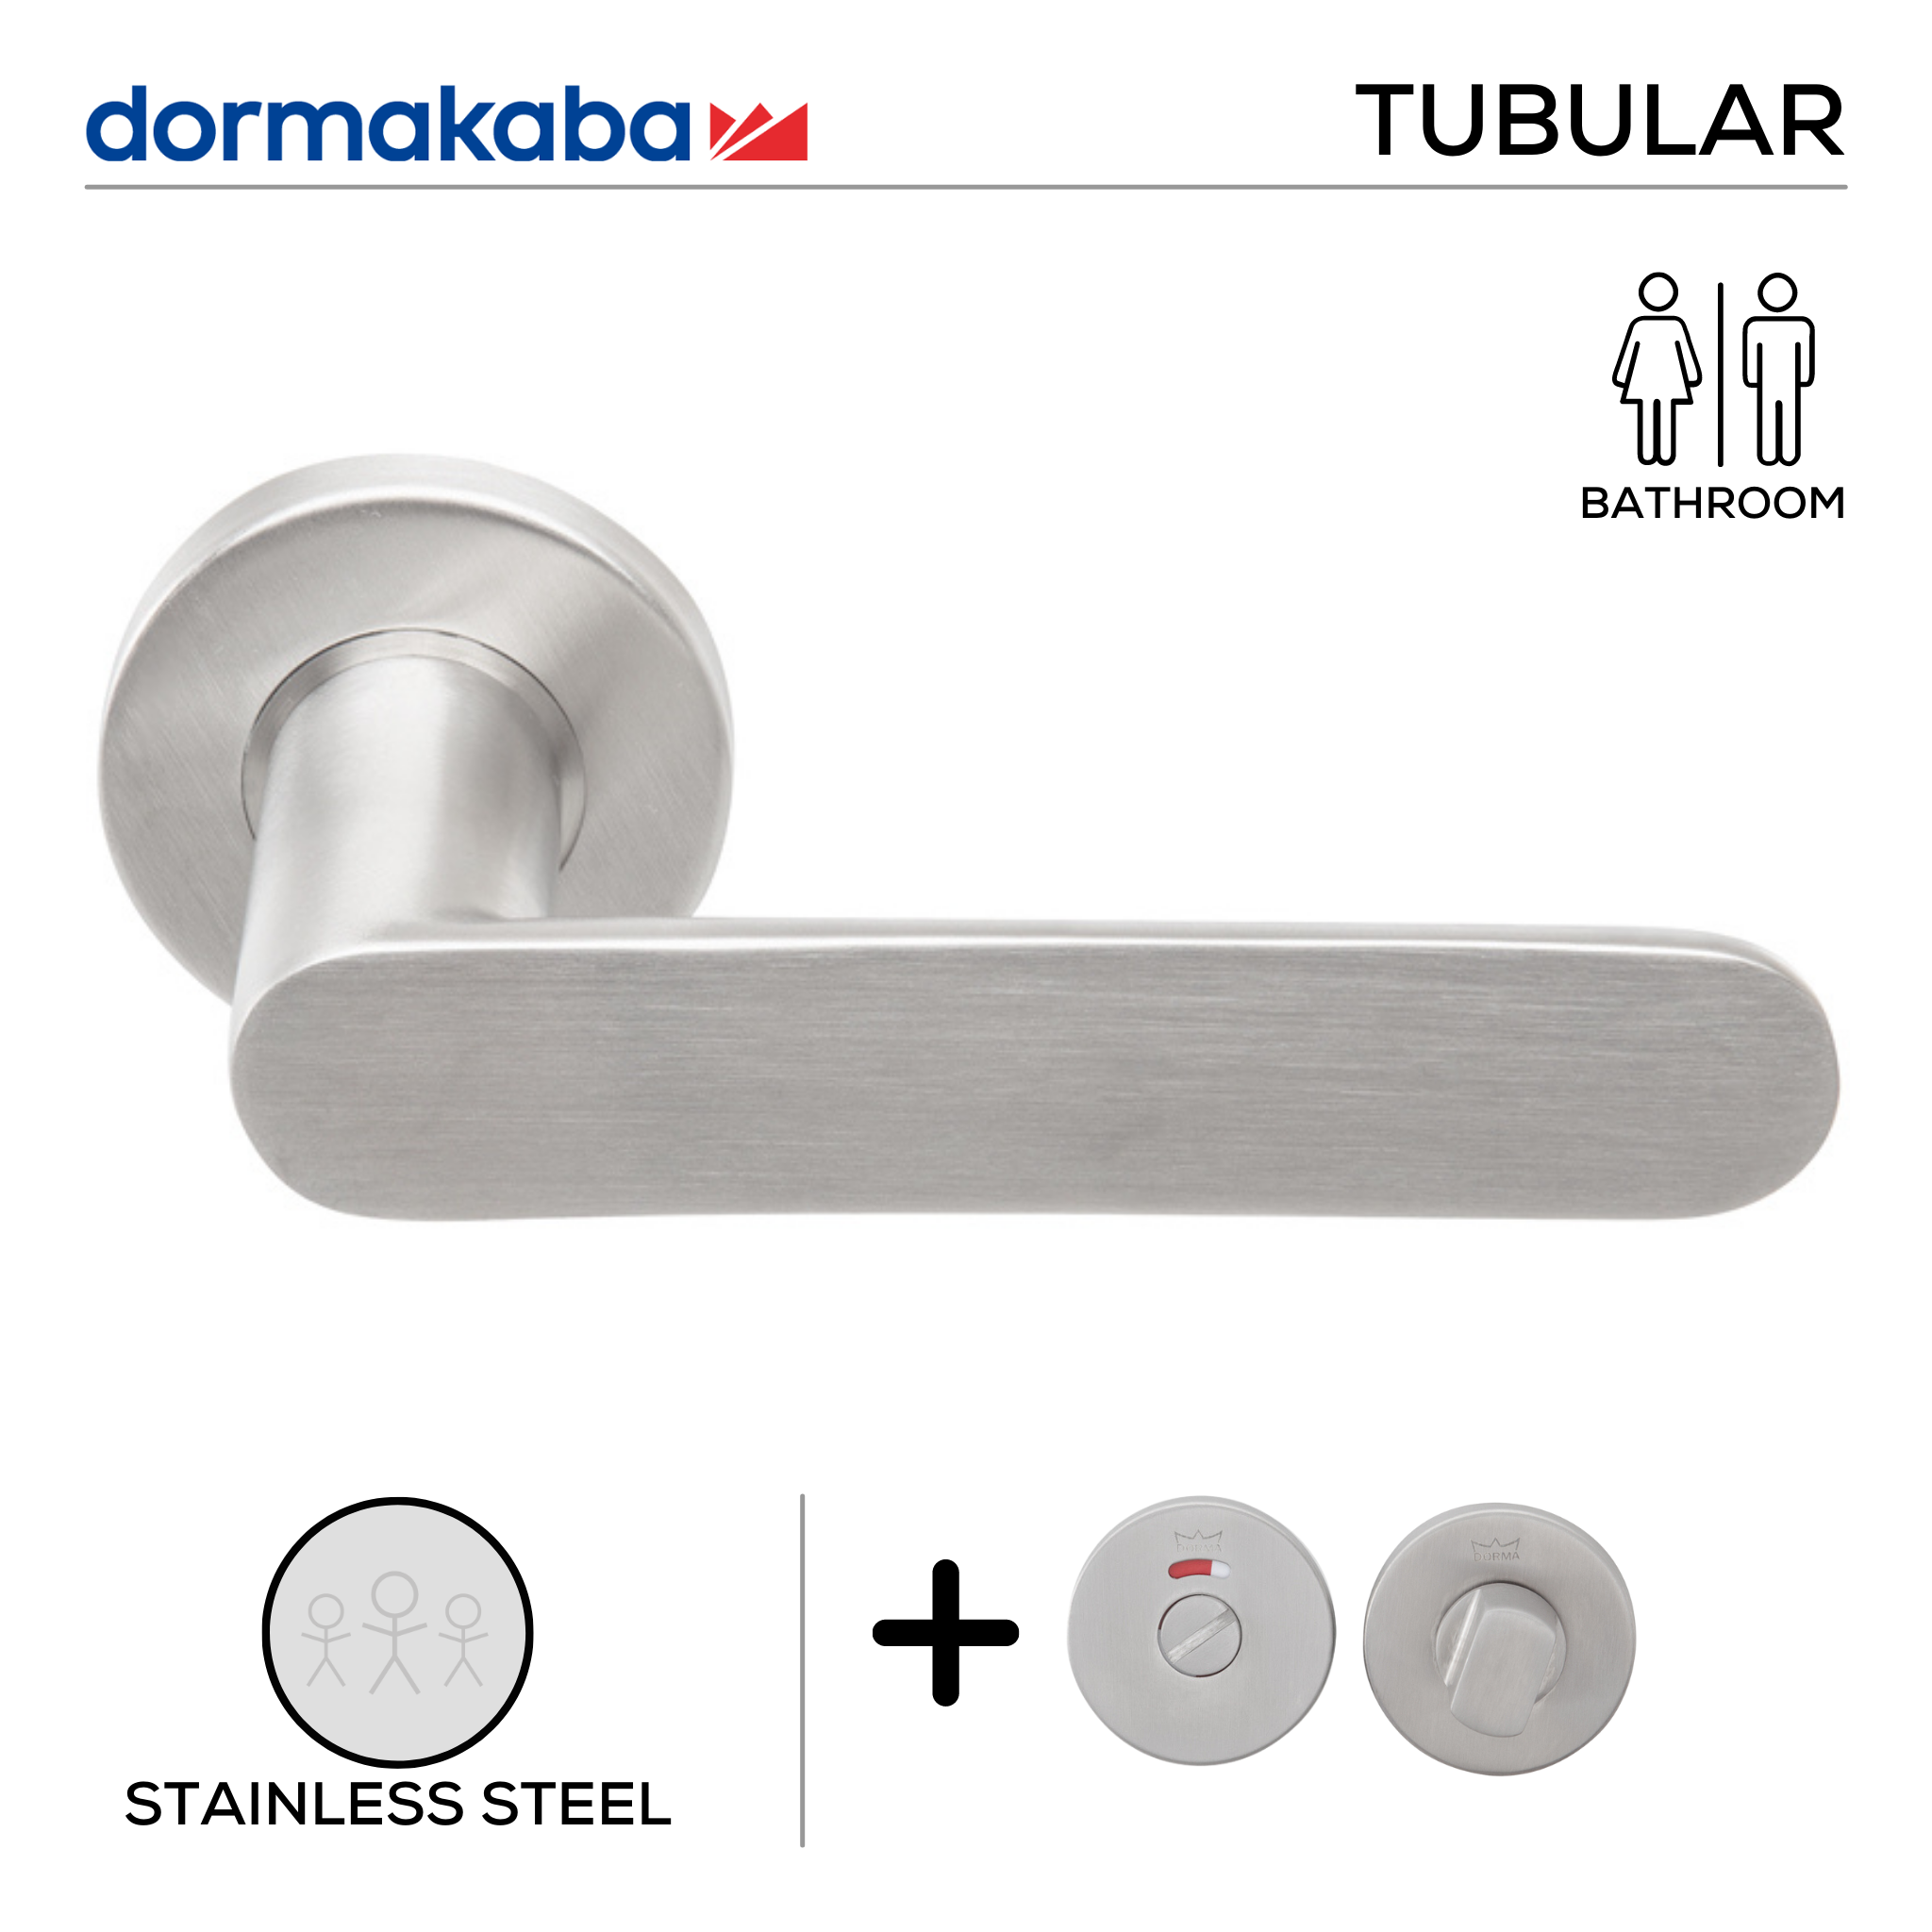 TH 132 Bathroom W/C, Lever Handles, Tubular, On Round Rose, With Bathroom (WC) Indicator Set - DWC 005, 140mm (l), Stainless Steel, DORMAKABA